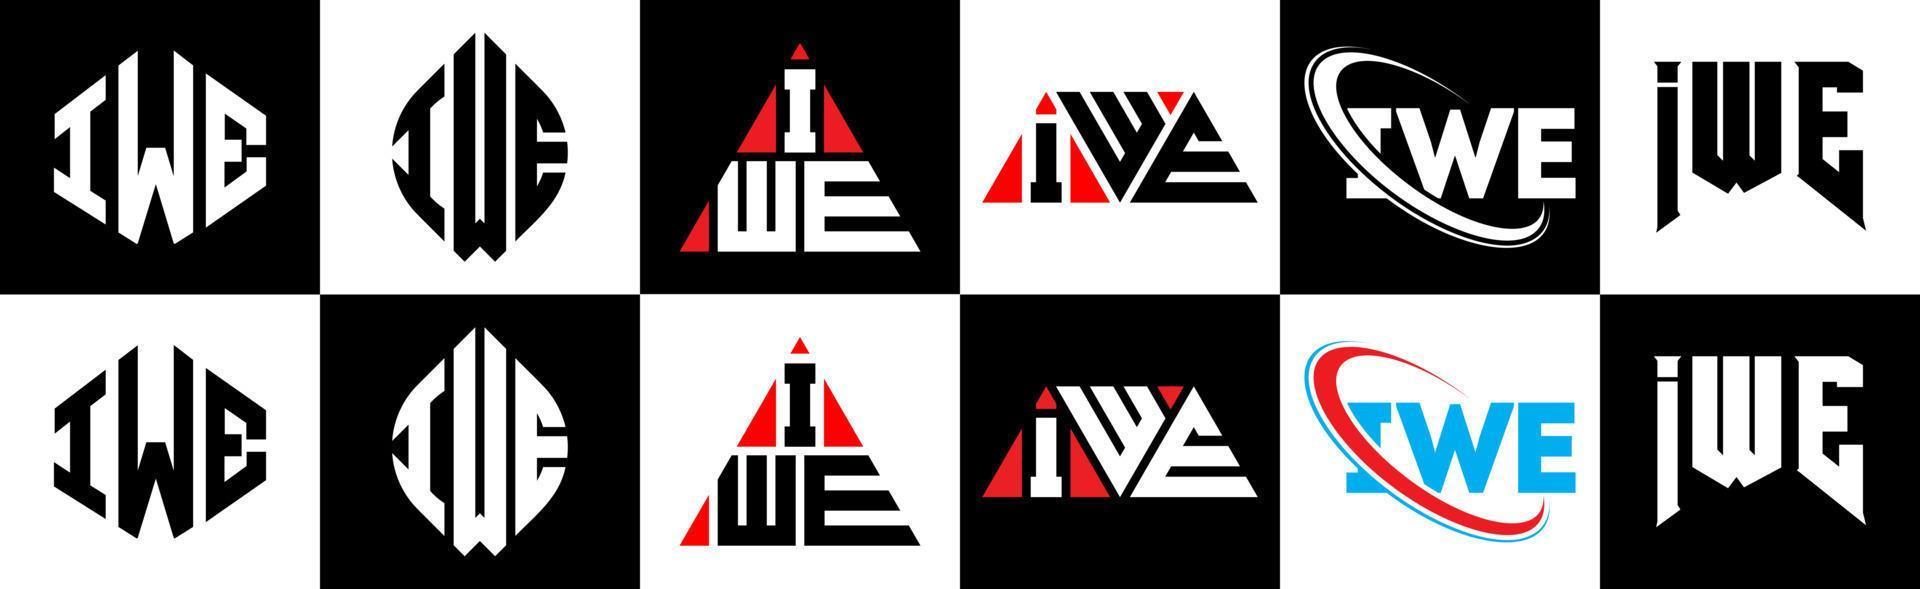 IWE letter logo design in six style. IWE polygon, circle, triangle, hexagon, flat and simple style with black and white color variation letter logo set in one artboard. IWE minimalist and classic logo vector